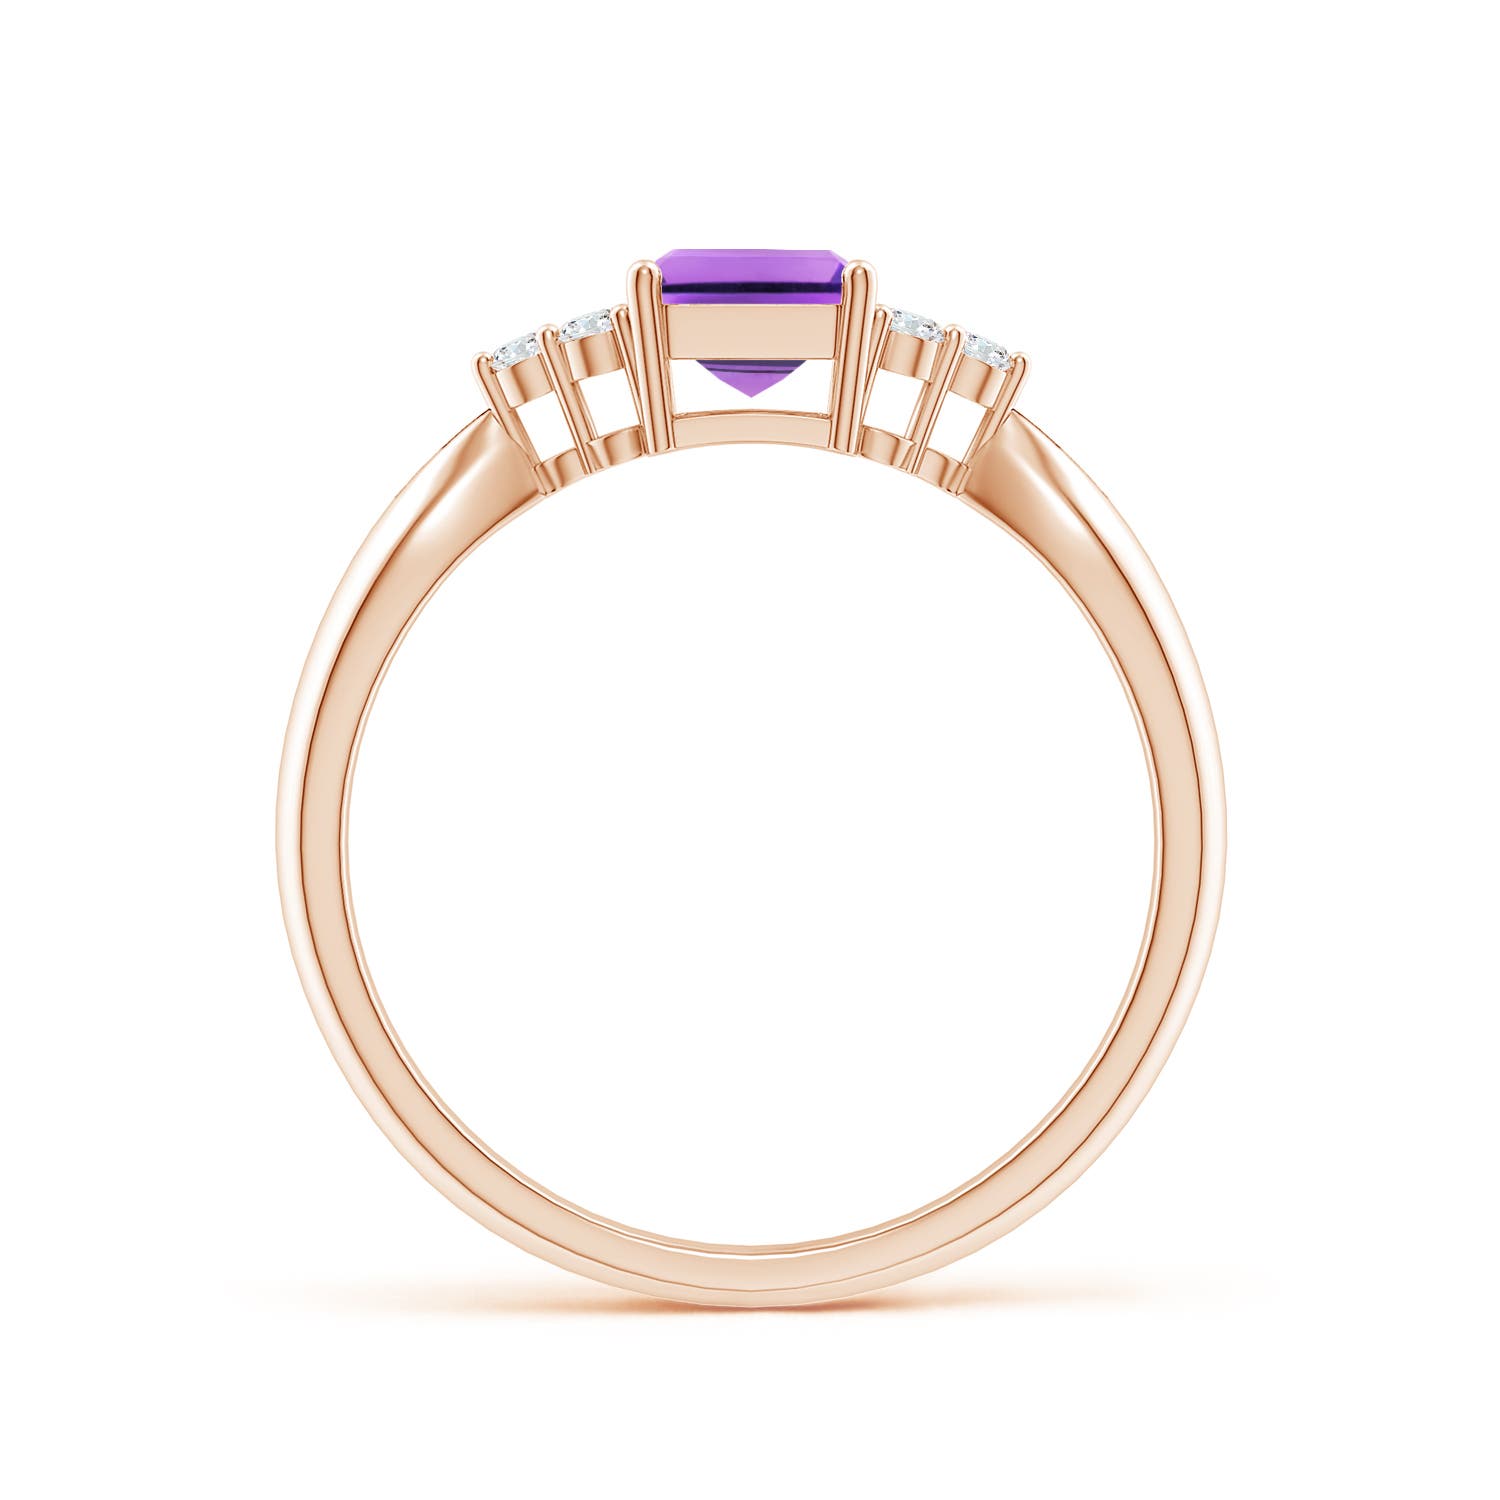 AA - Amethyst / 1.07 CT / 14 KT Rose Gold